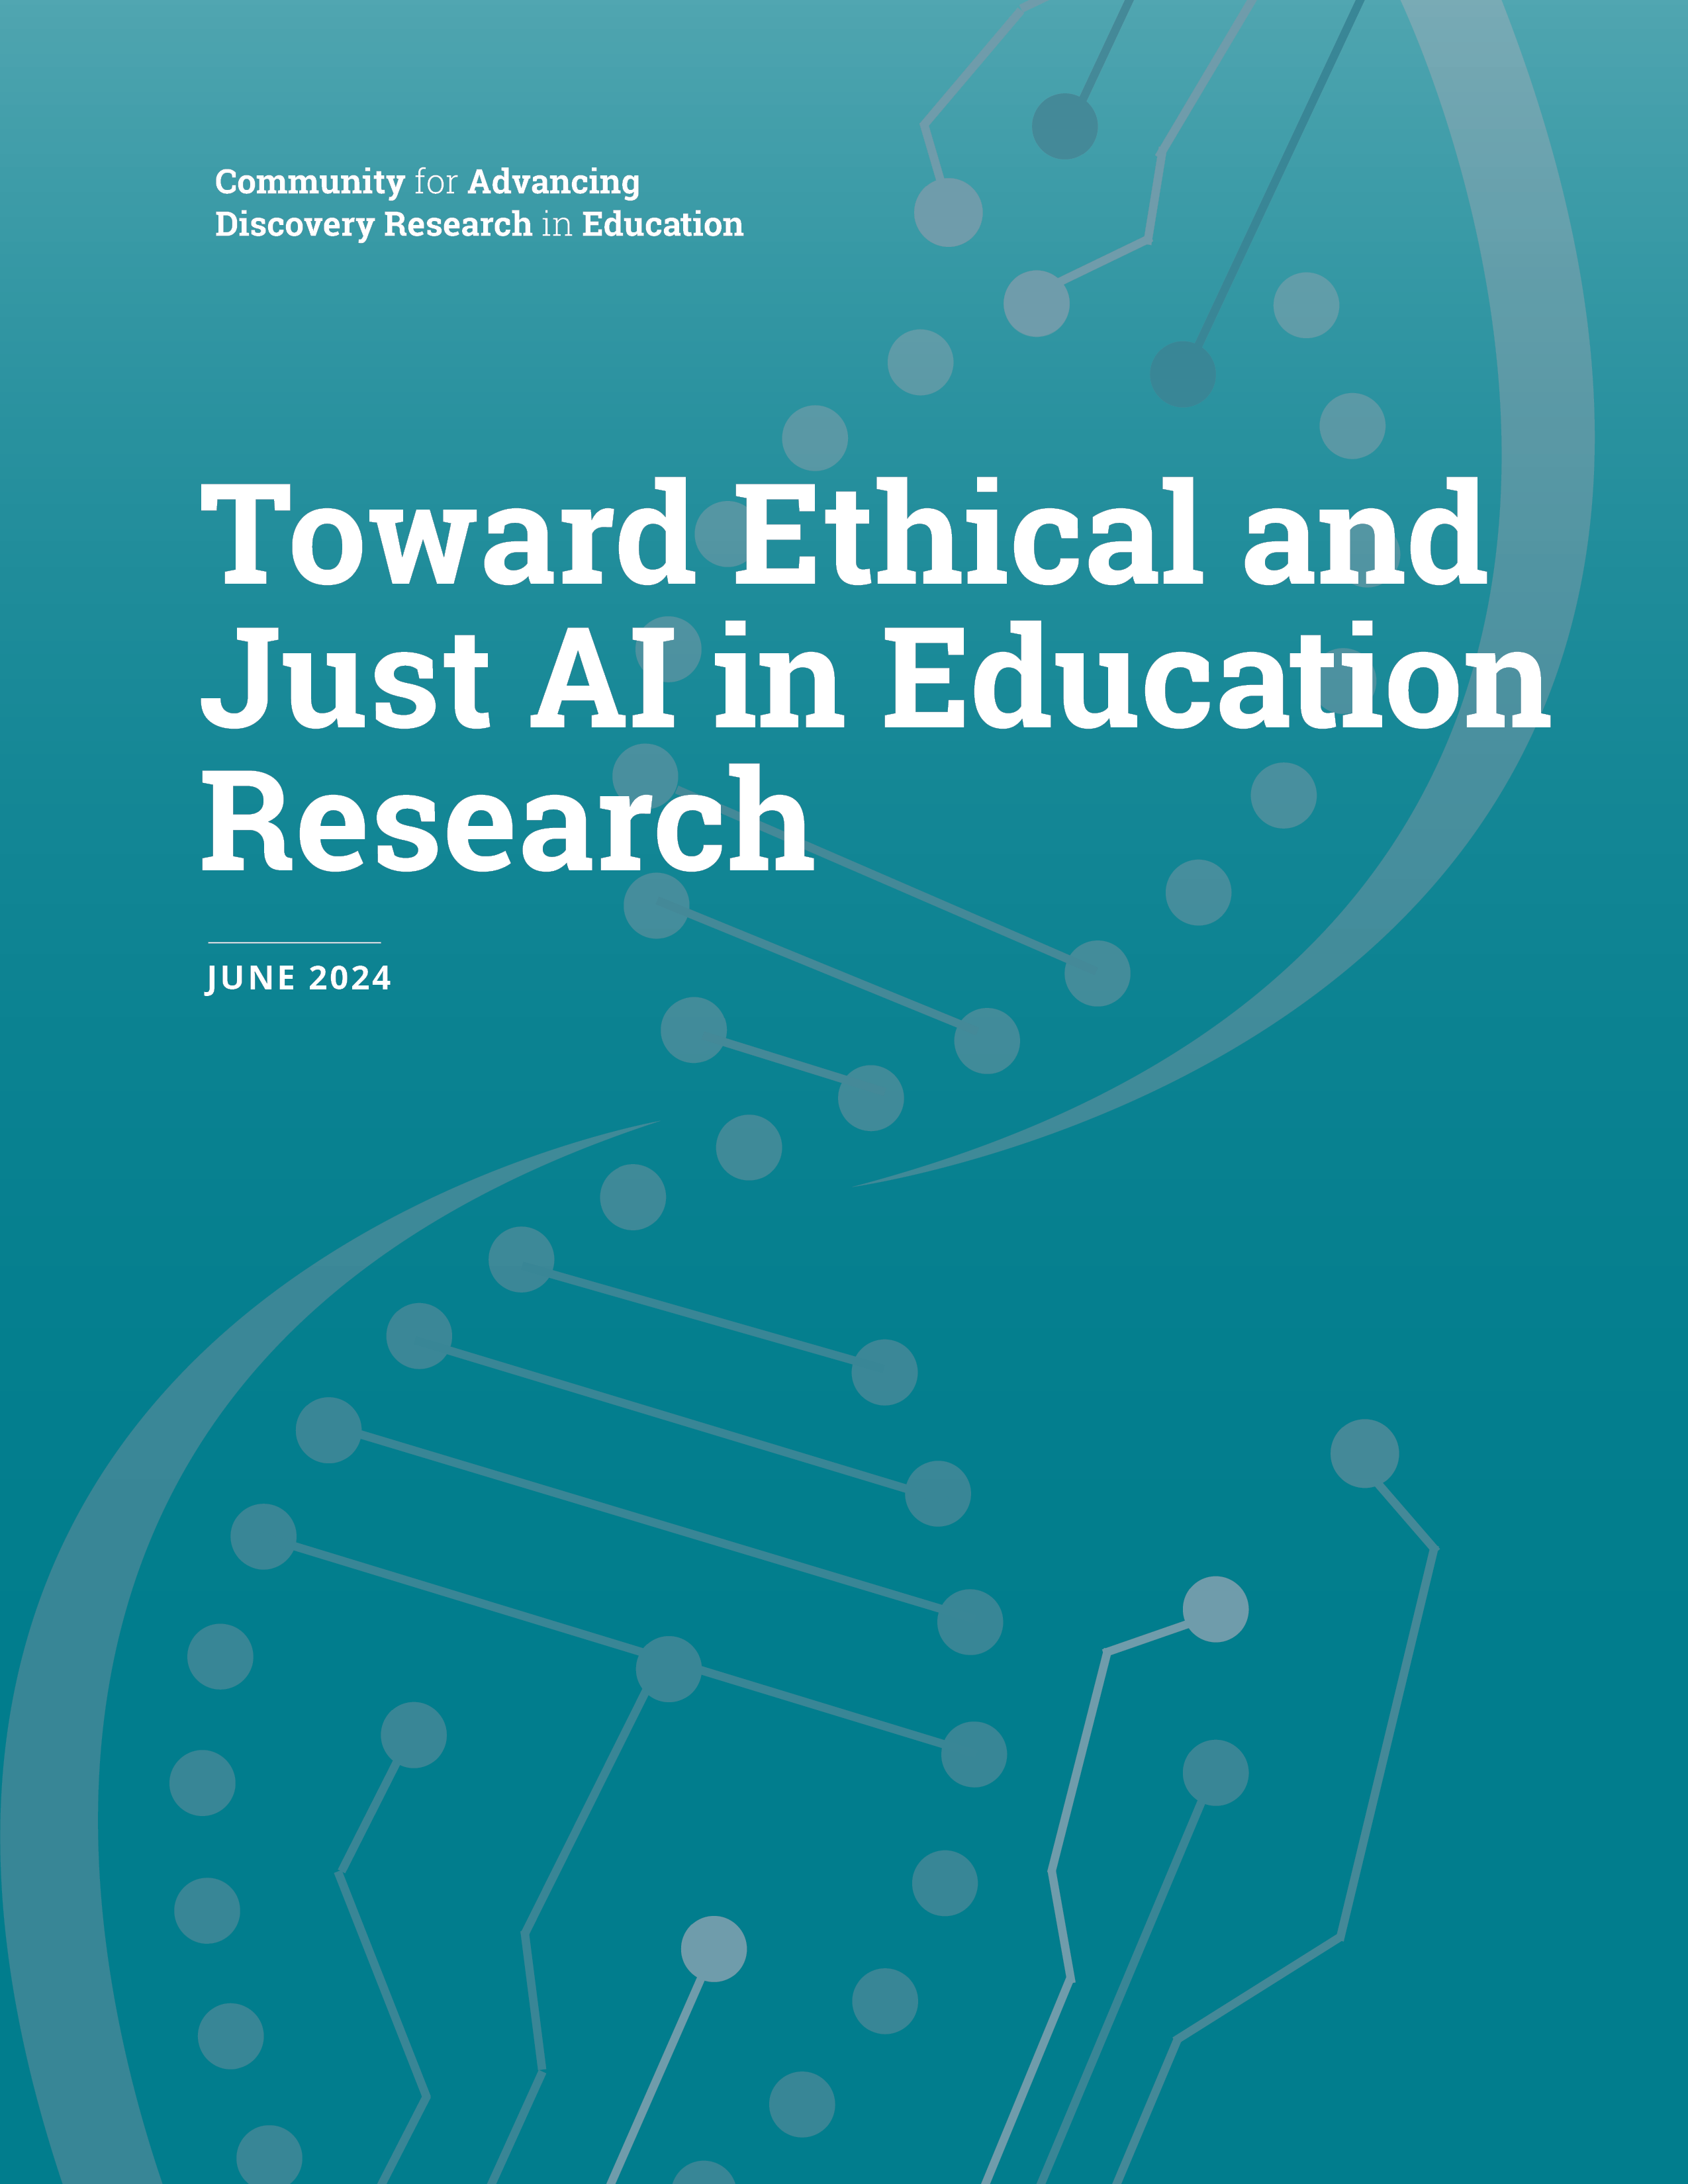 Front cover of the Toward Ethical and Just AI in Education Research Brief. Includes a stylized CADRE logo.